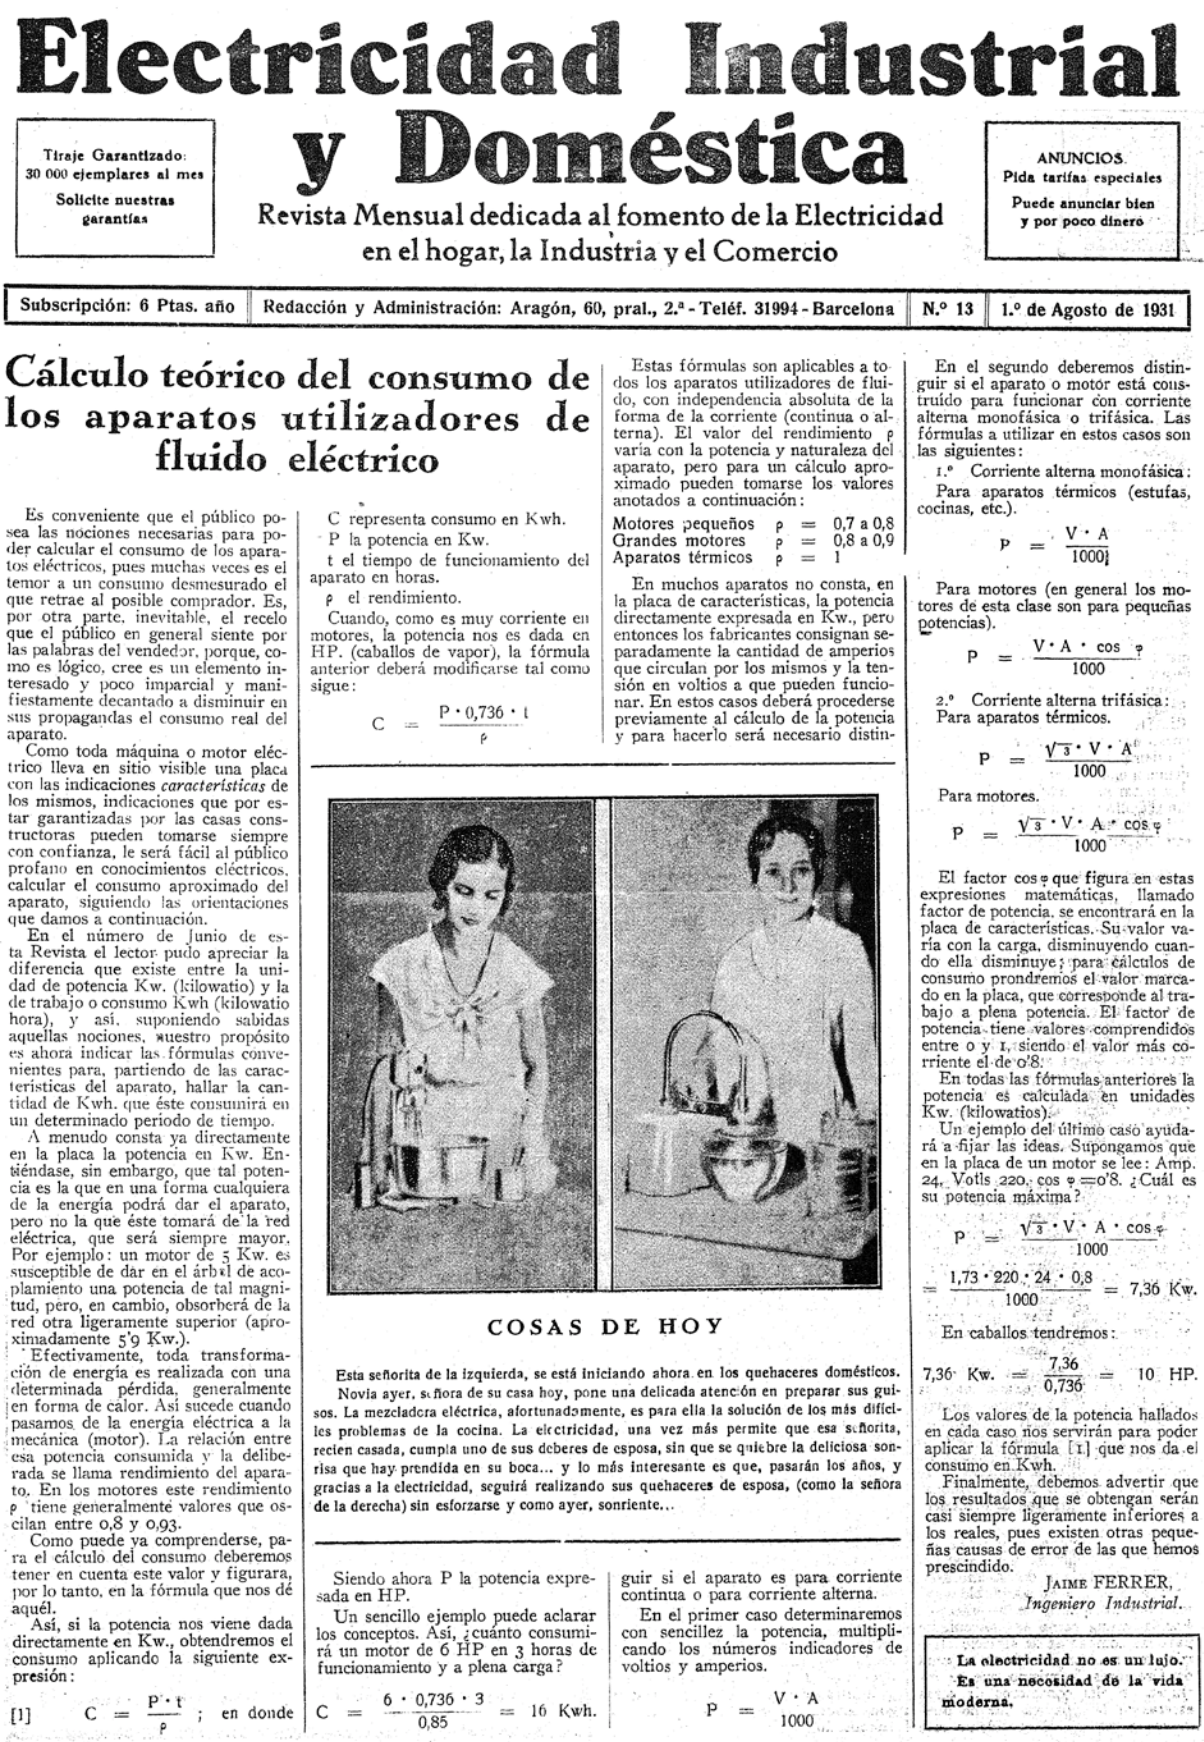 Figure 1: Cover of the journal Electricidad Industrial y Doméstica. Source: Electricidad Industrial y Doméstica, no 13, 1931, cover.